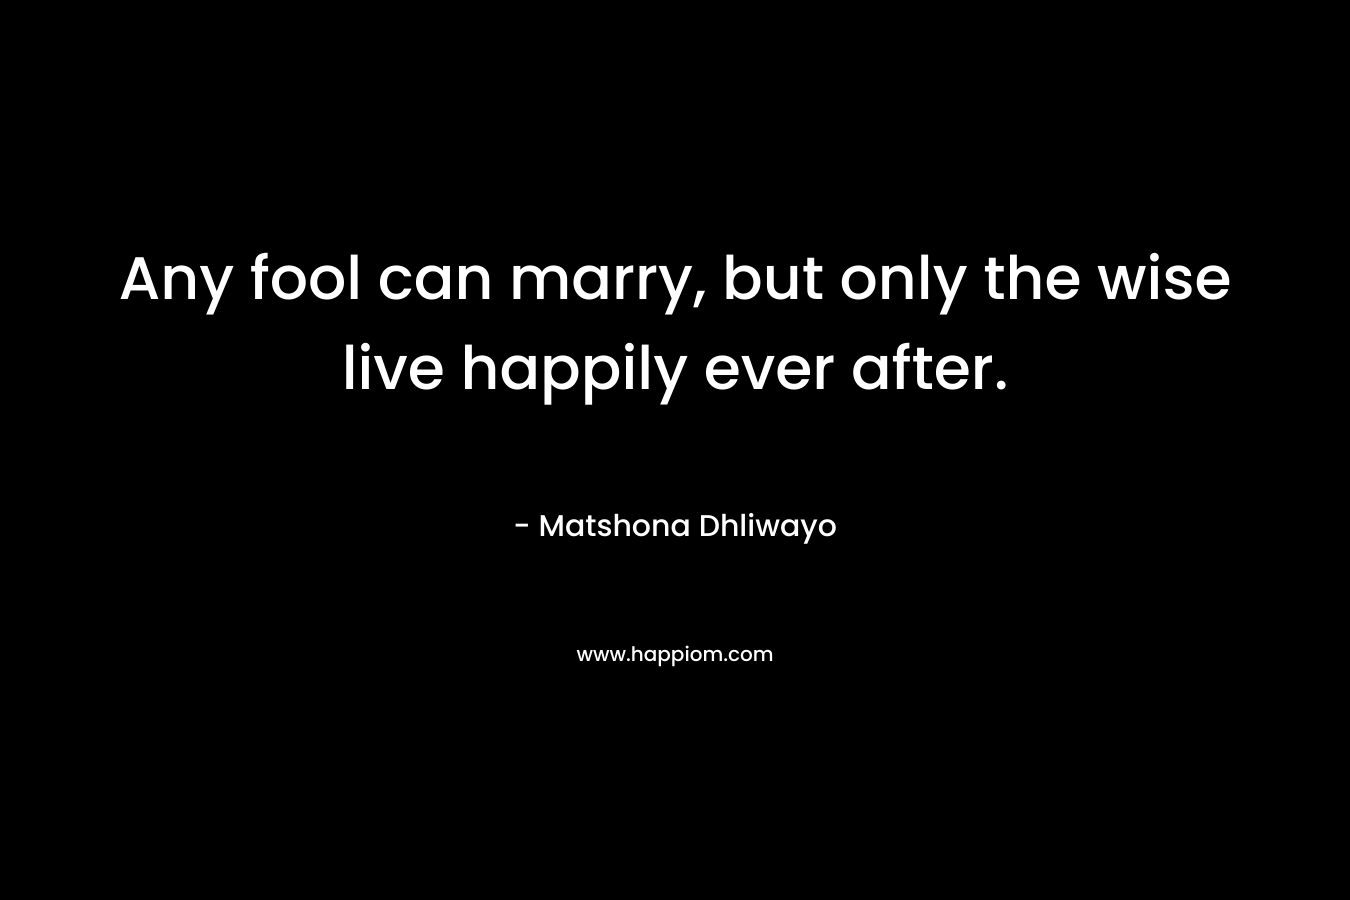 Any fool can marry, but only the wise live happily ever after.